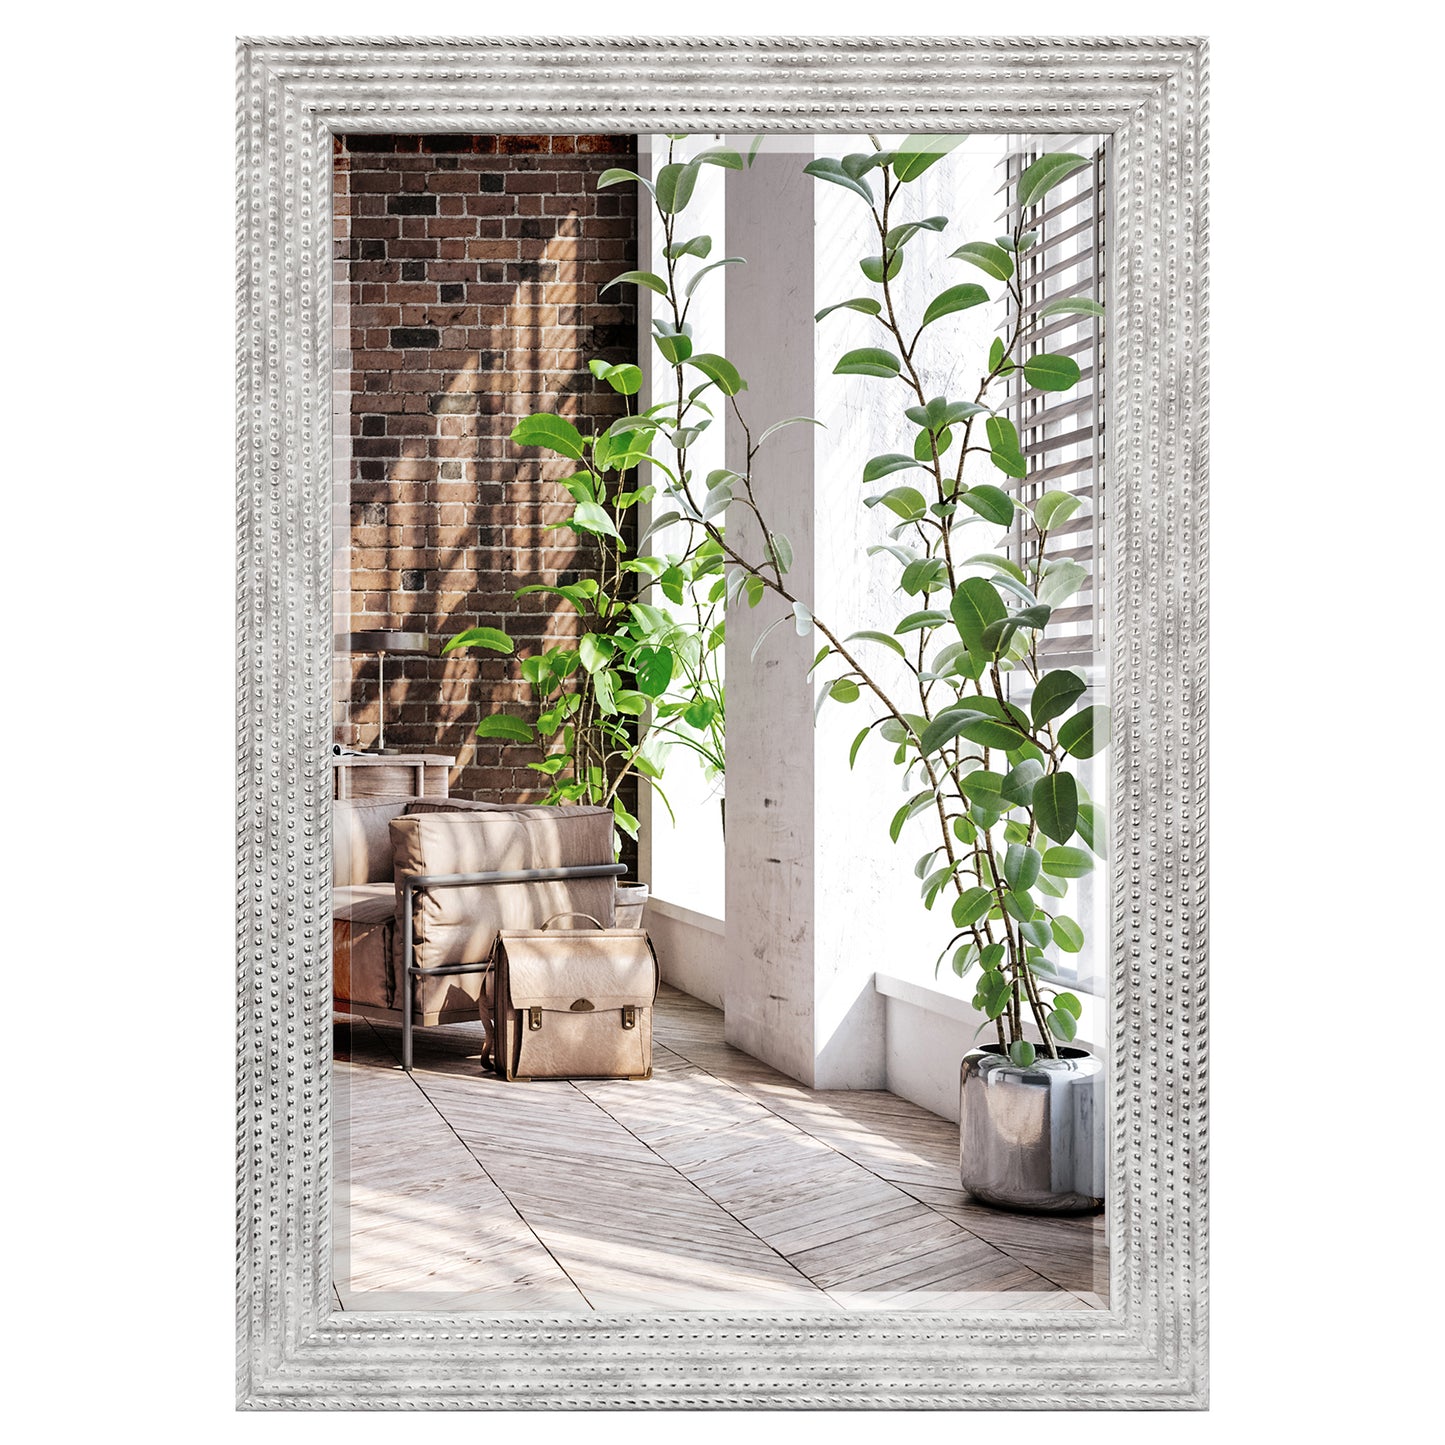 Framed Distressed Wall Mirror - Wall Mirror for Bathroom, Living Room, Entryway Hall, and Mirror for Bedroom - Large Mirror for Wall